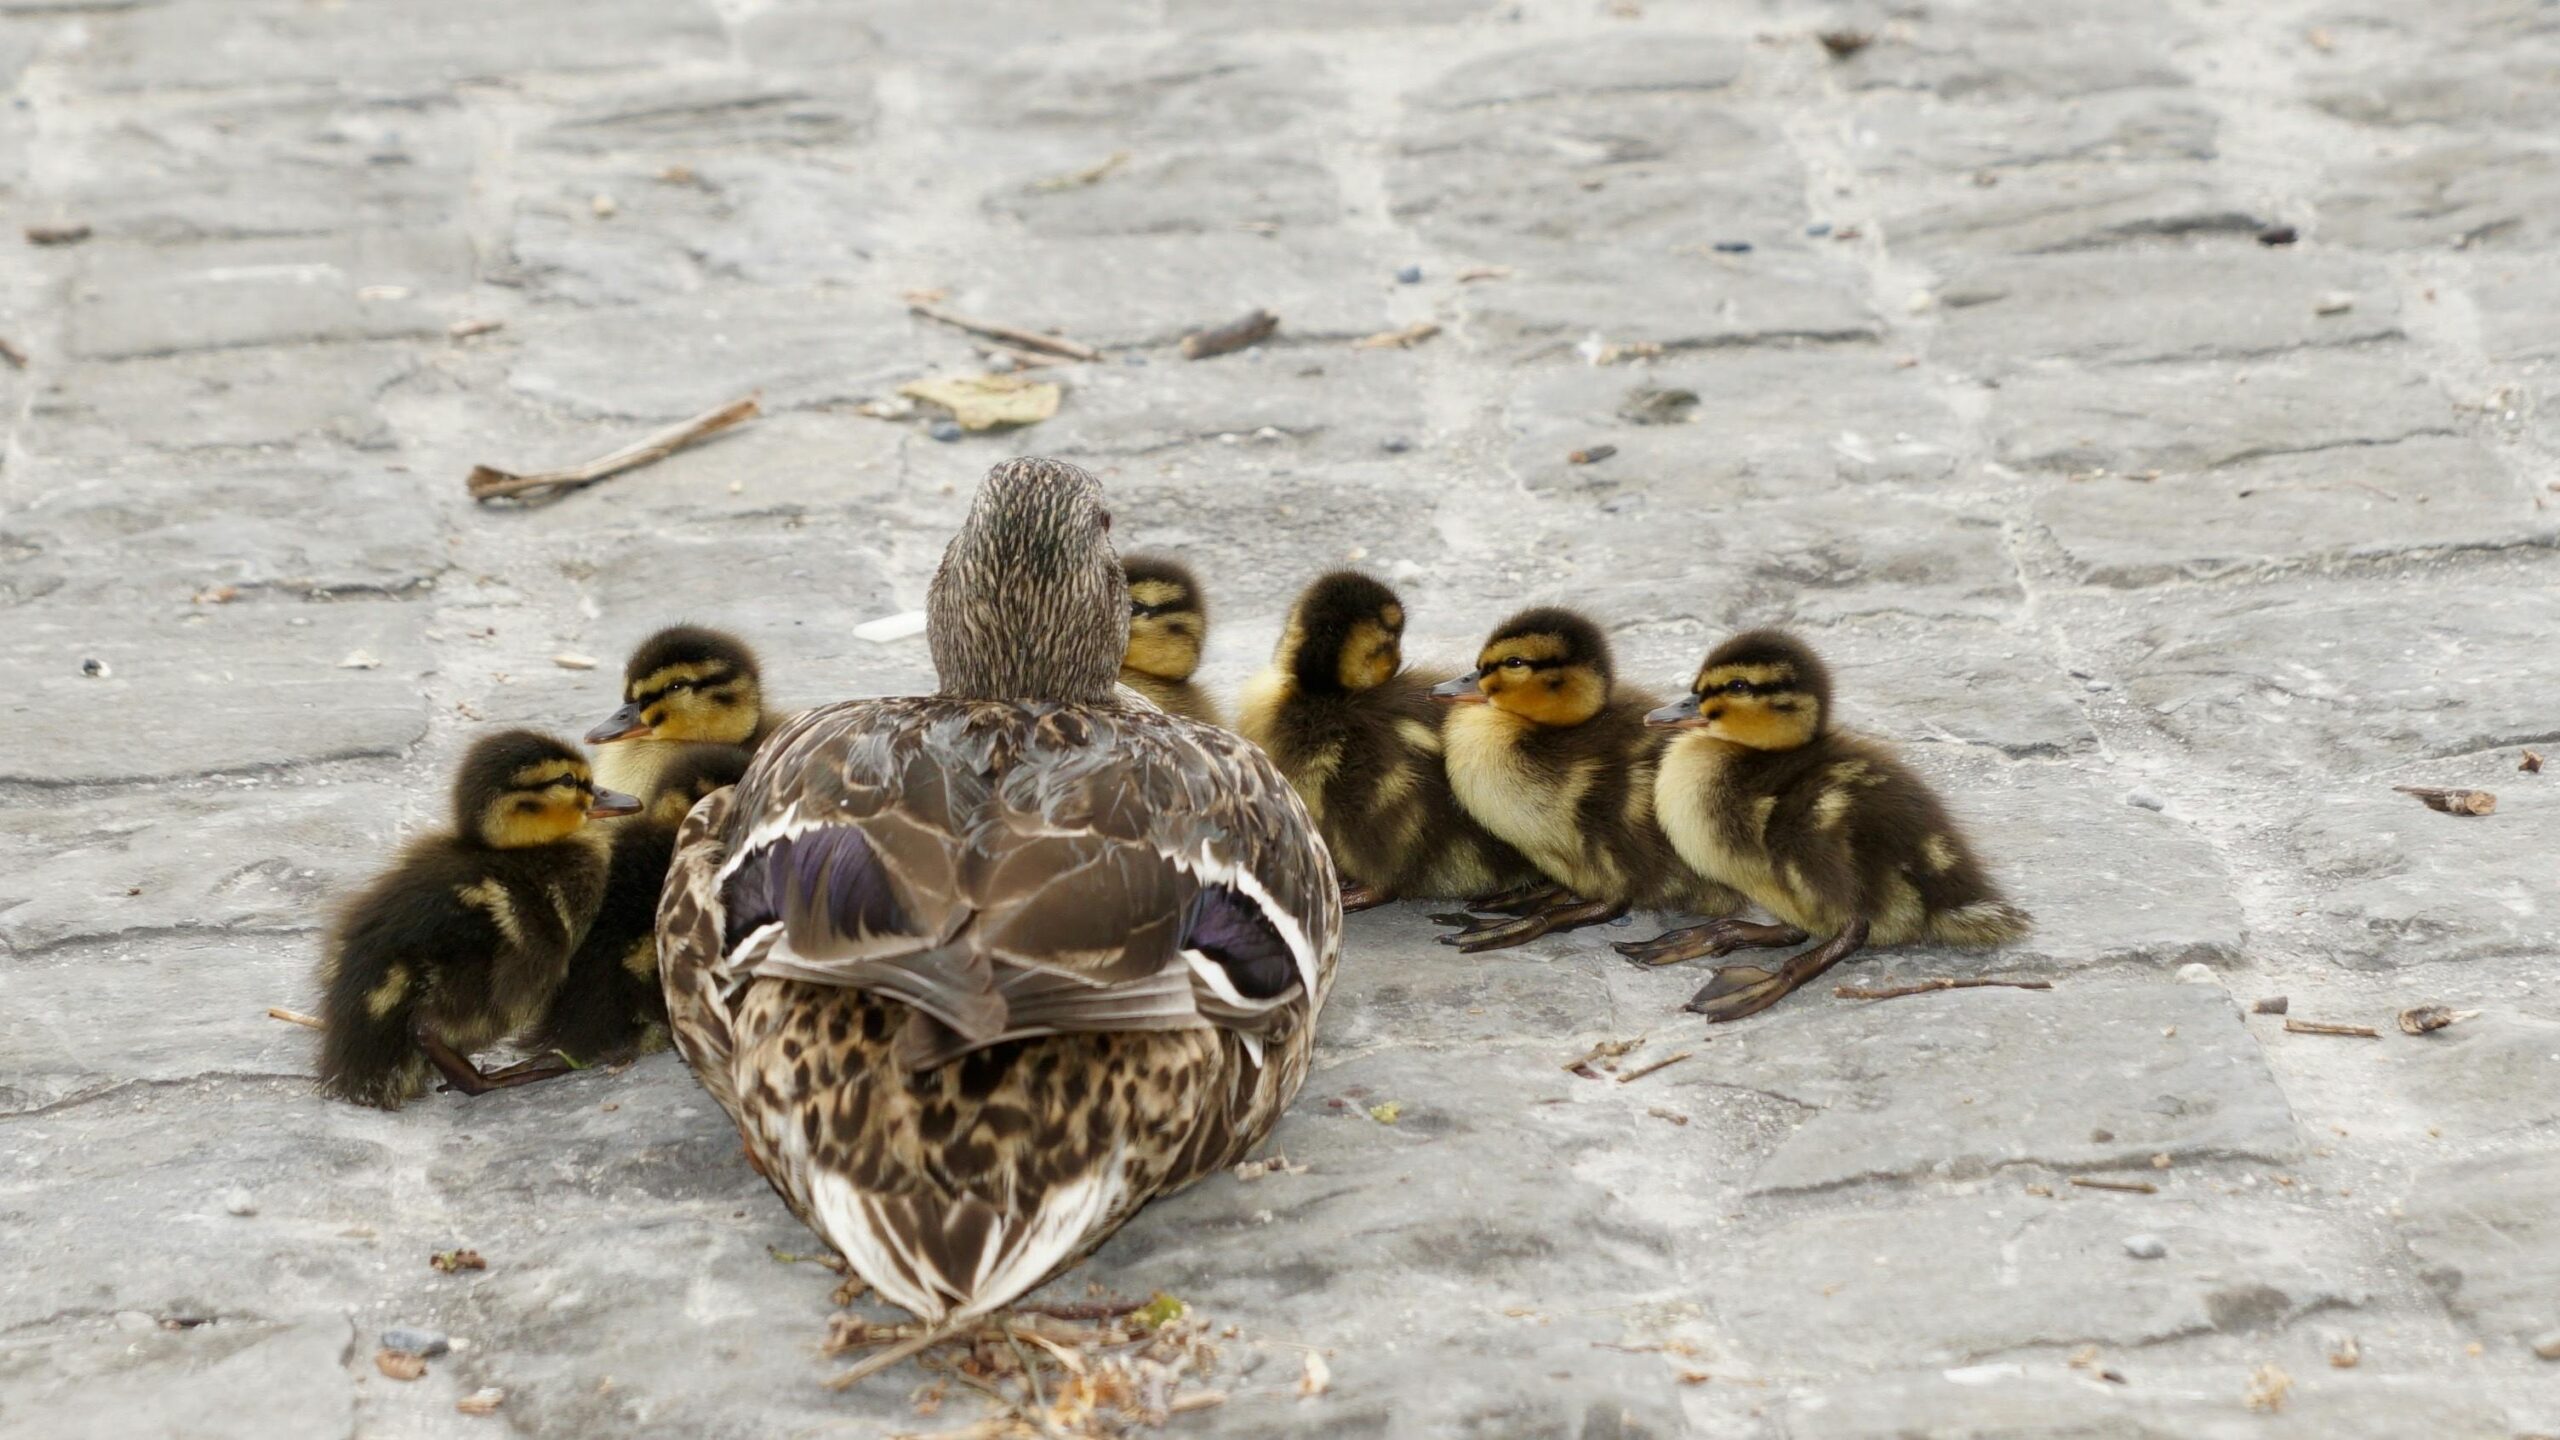 A duck and six ducklings on the concrete during daytime.